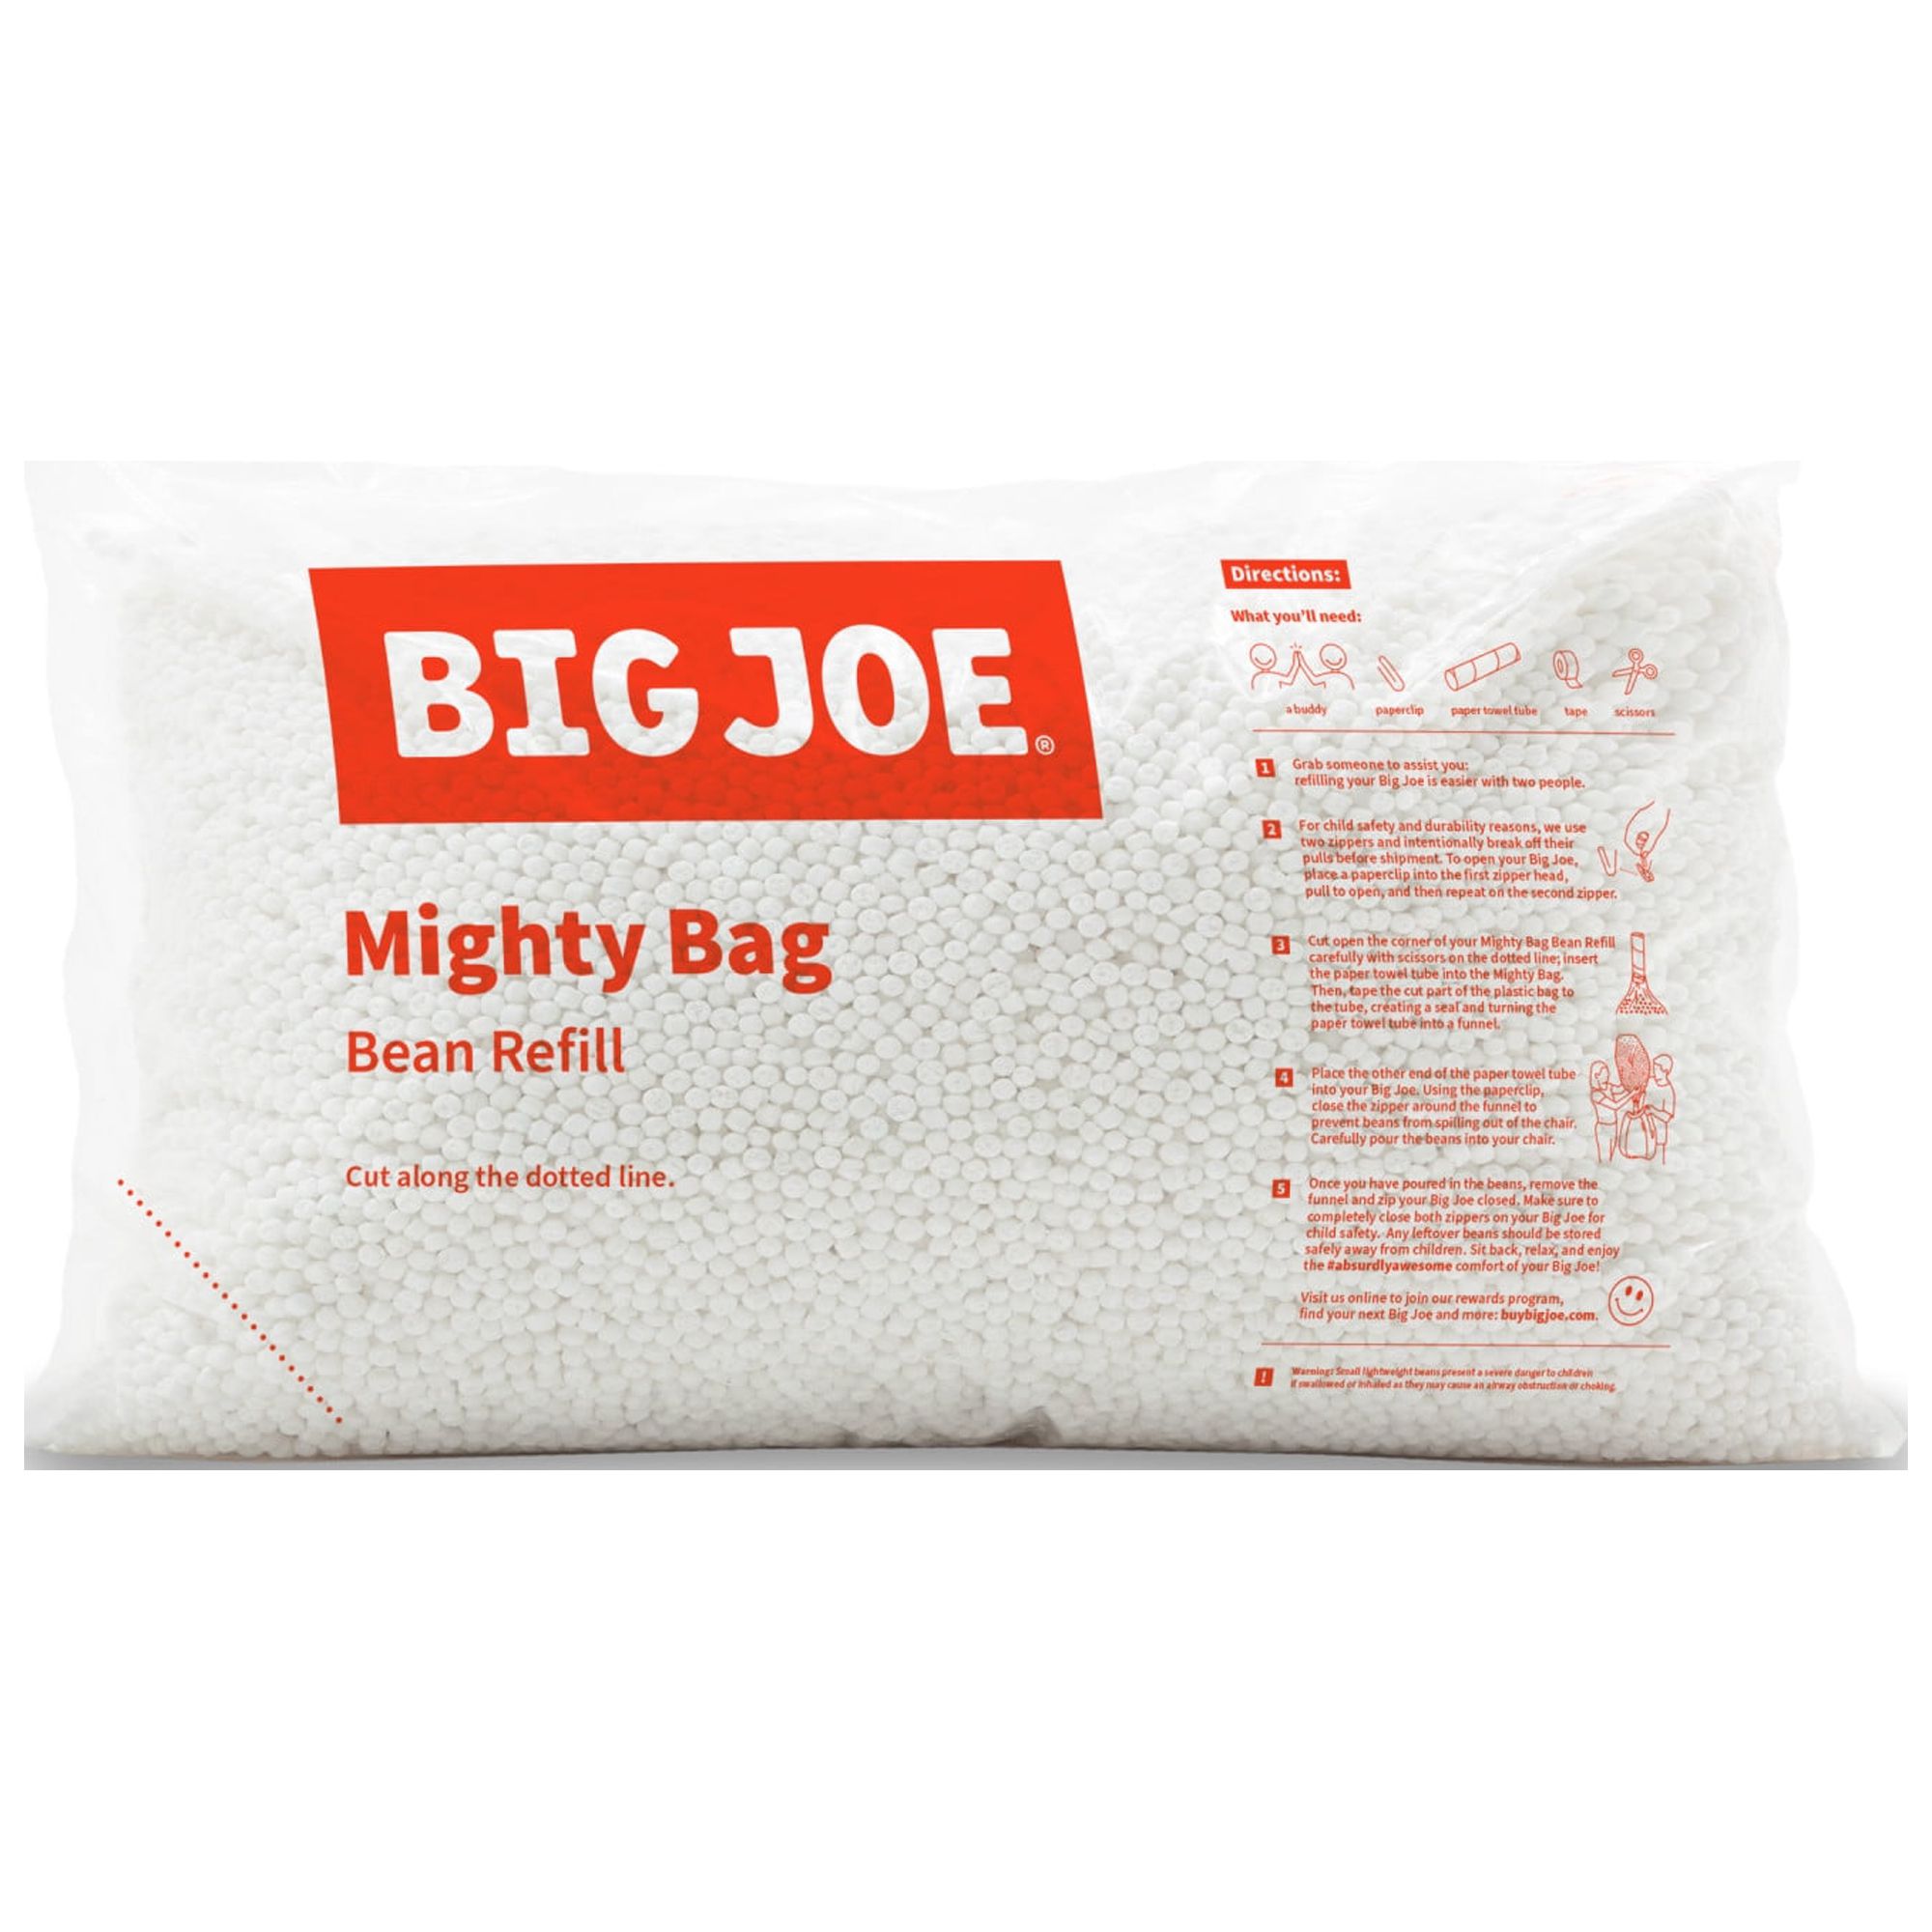 Big Joe Bean Refill Polystyrene Beans for Bean Bags or Crafts, 100 Liters - image 1 of 5